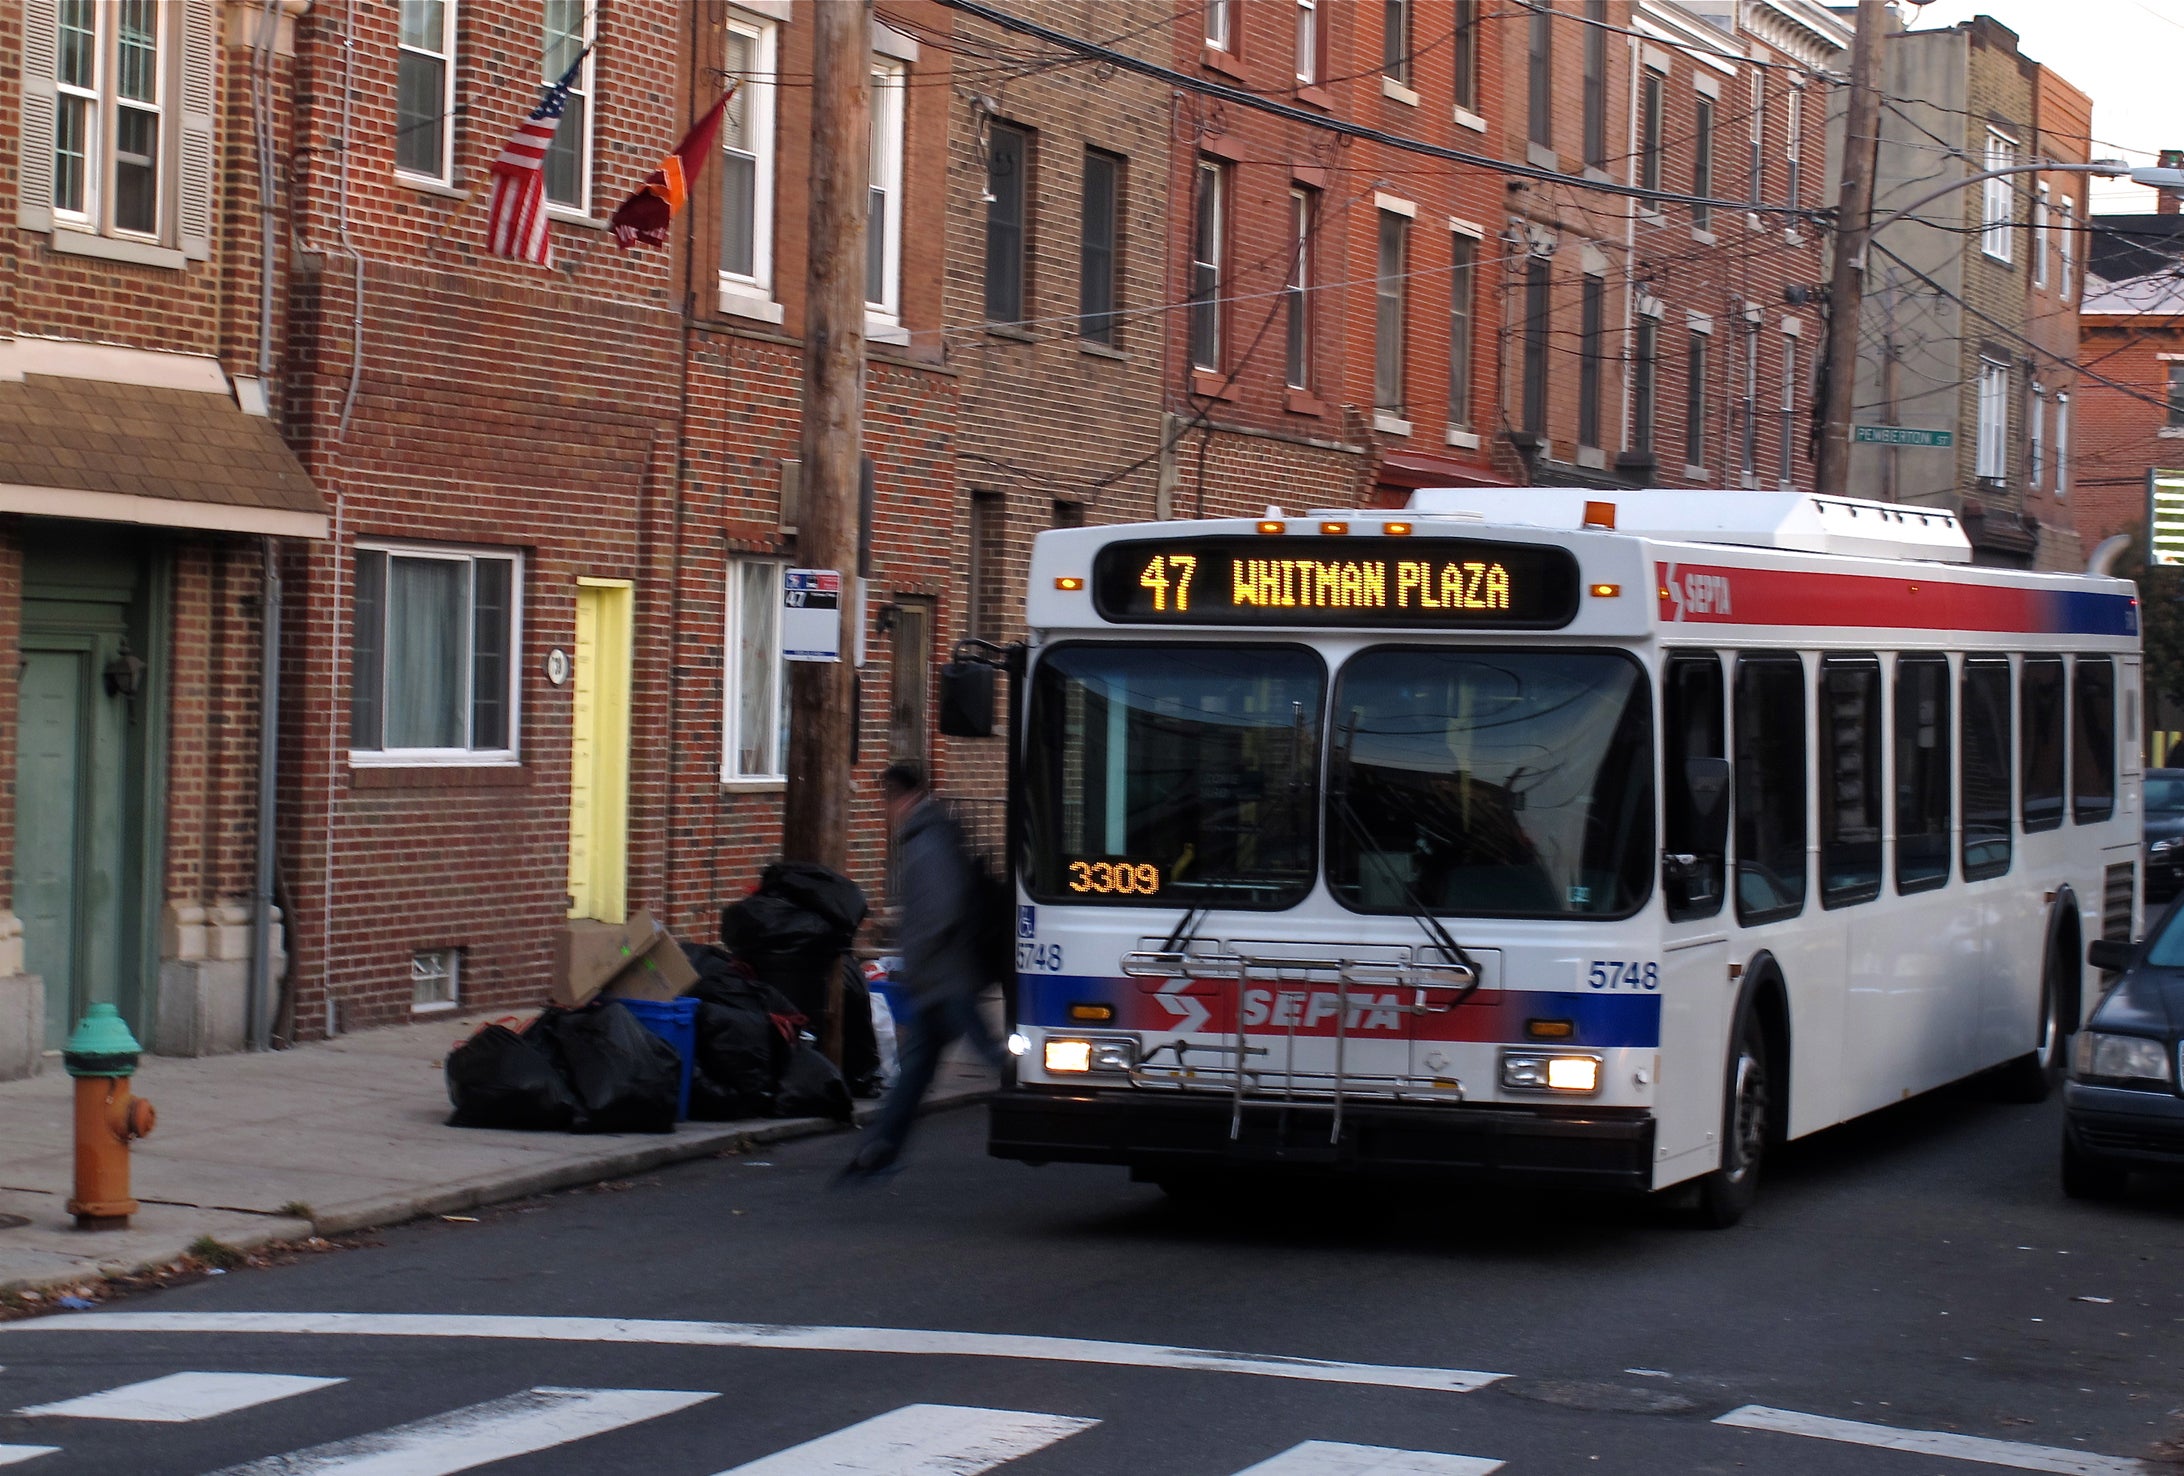 http-planphilly-com-eyesonthestreet-wp-content-uploads-2011-11-route47-jpg